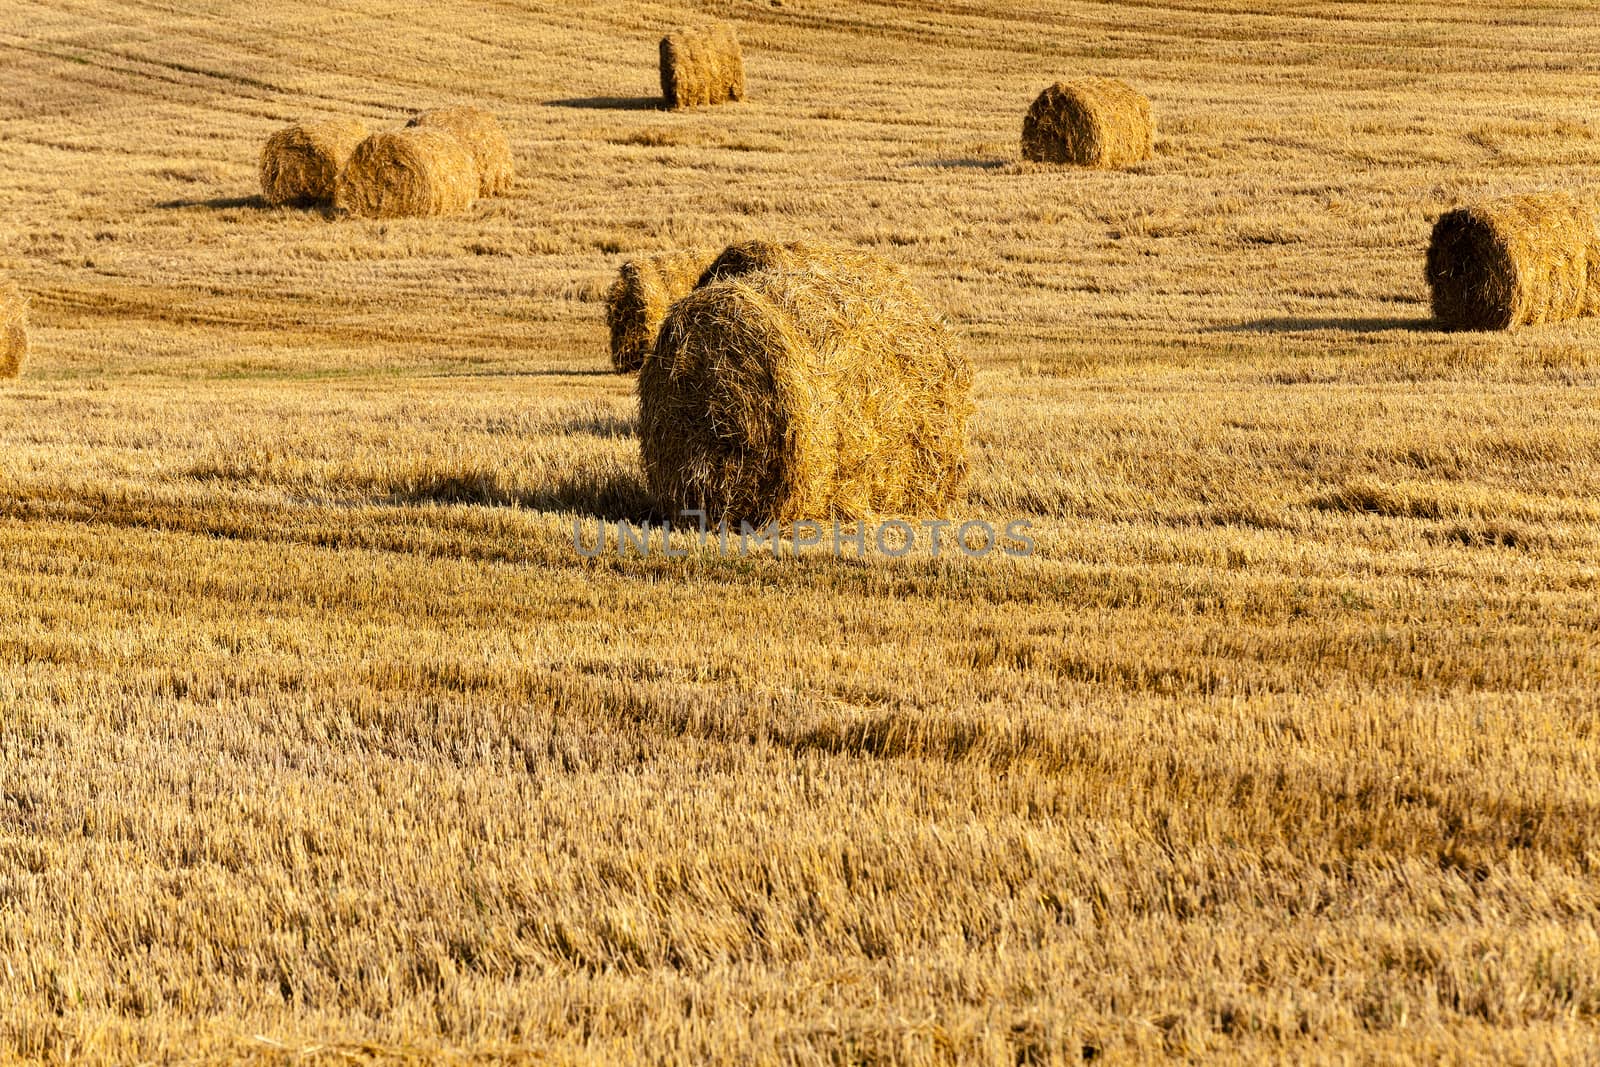  the straw put in a stack after wheat harvesting